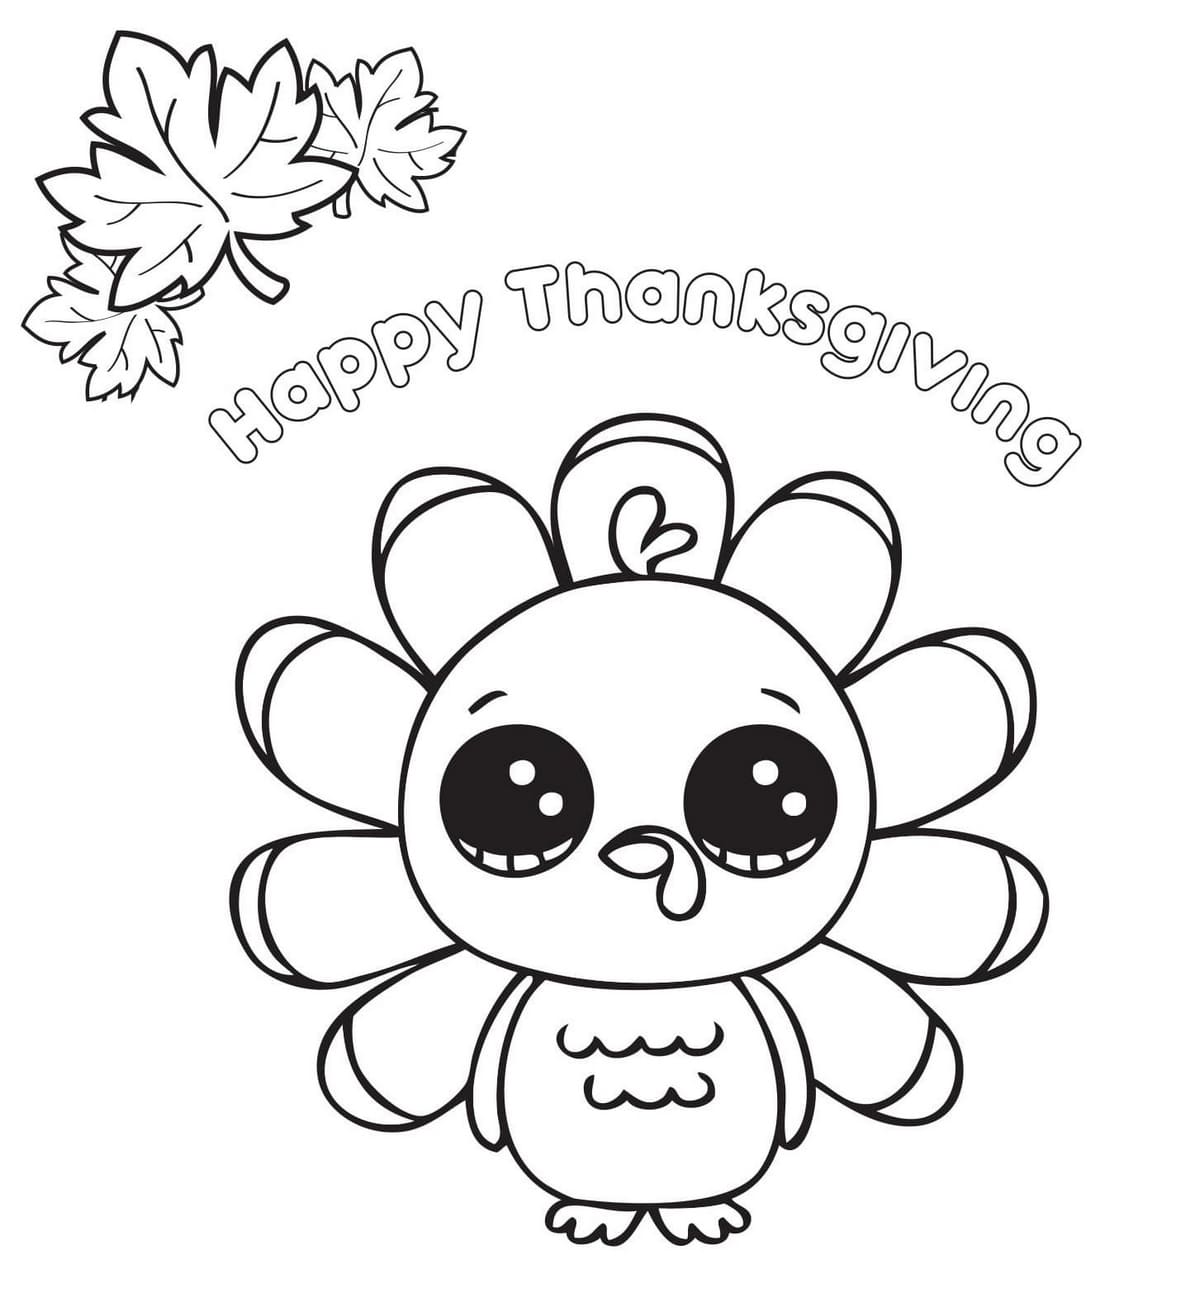 Thanksgiving coloring pages. 20 Printable coloring pages